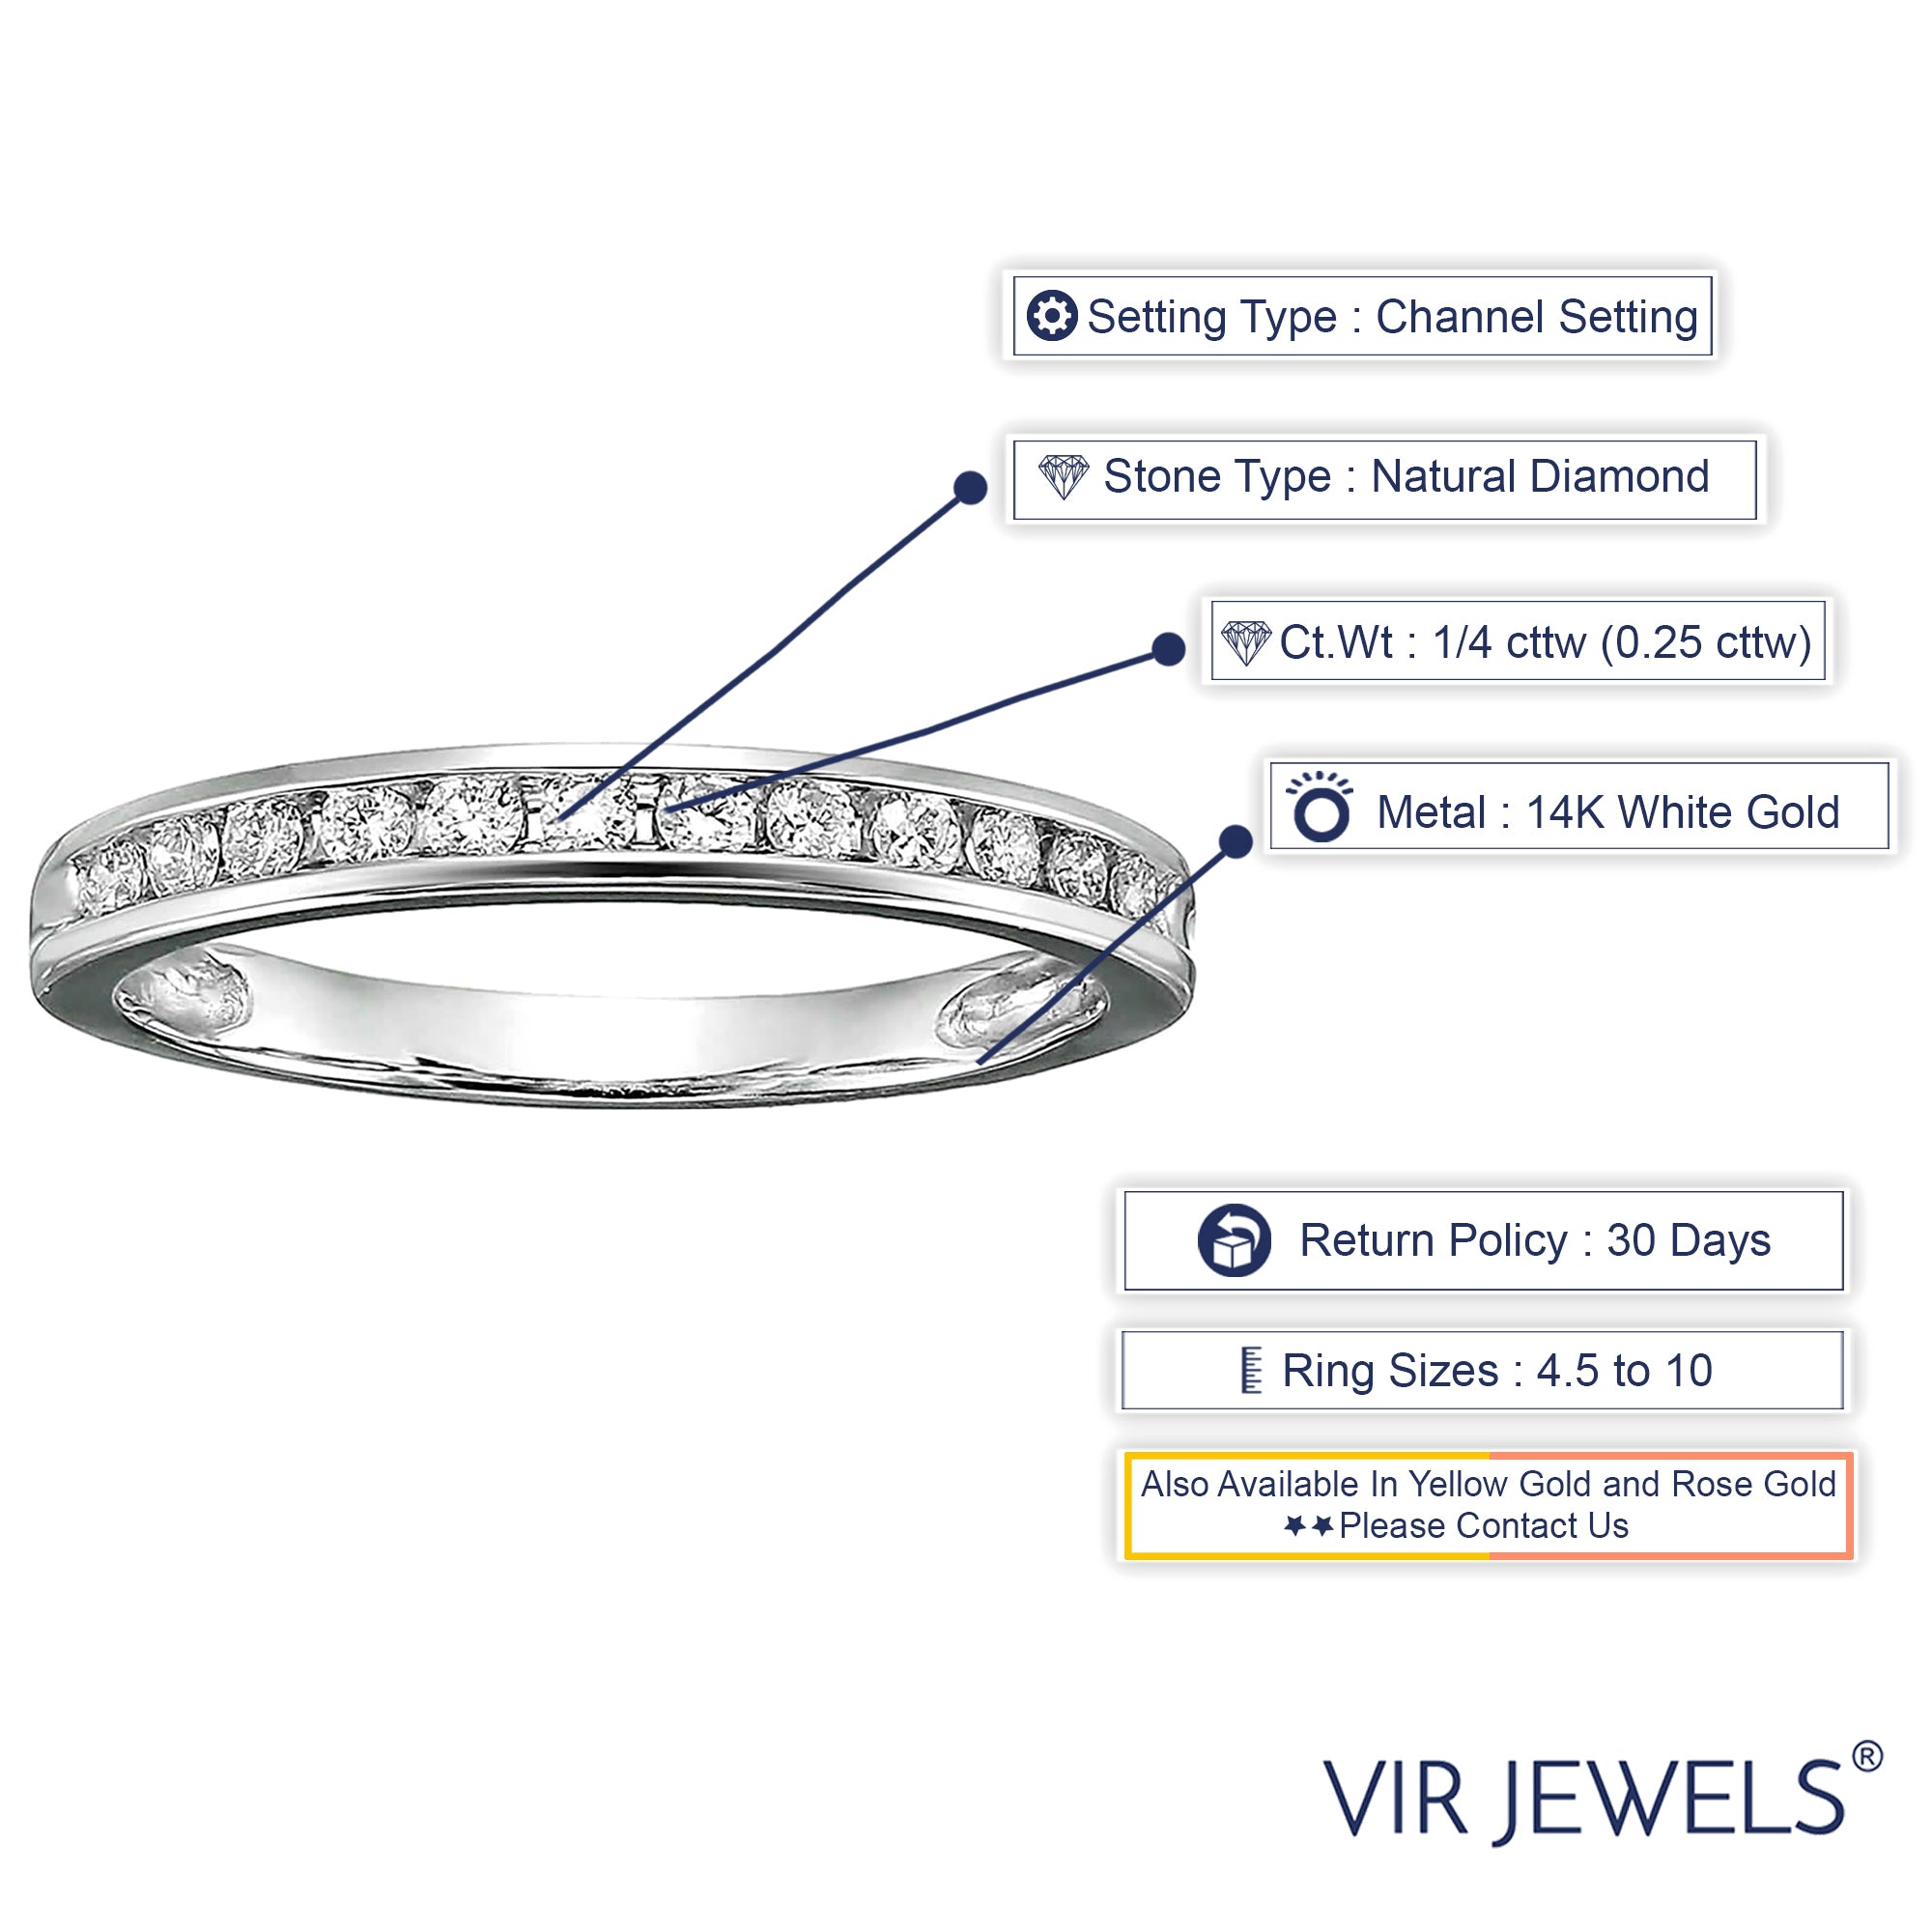 1/4 cttw Diamond Wedding Band For Women, Classic Diamond Wedding Band in 14K White Gold Channel Set, Size 4.5-10